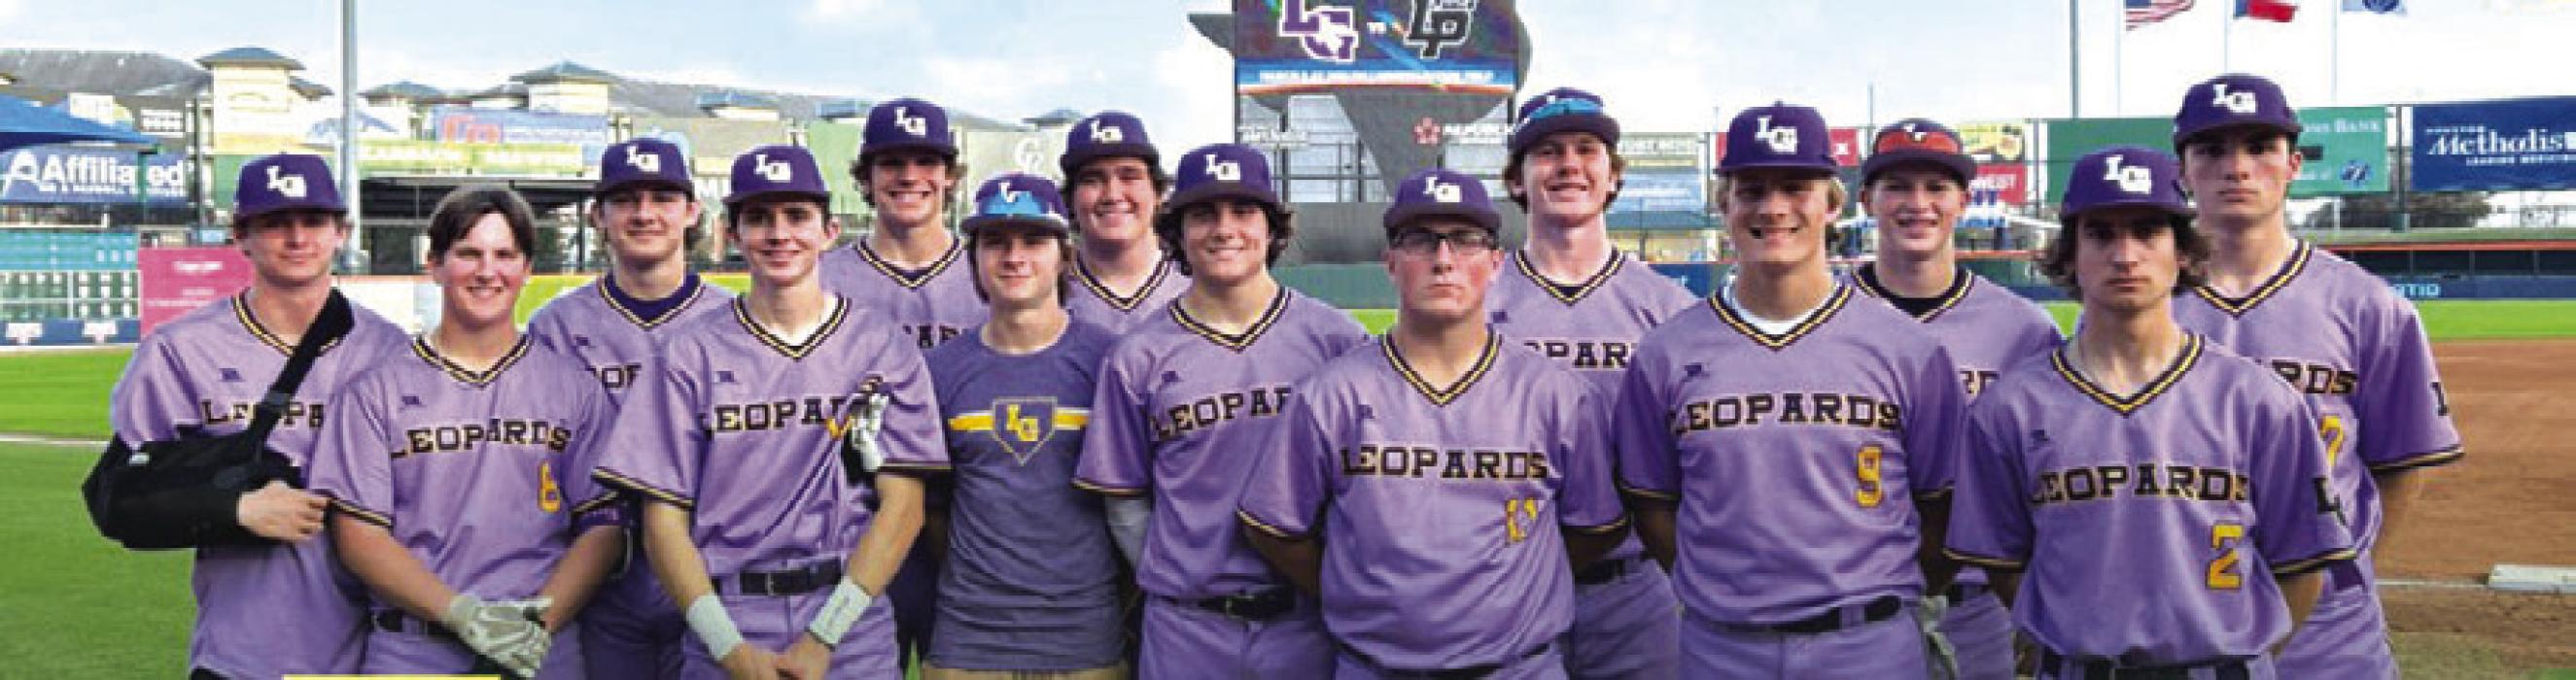 The members of the La Grange baseball team pose at Constellation Field in Sugar Land, home of the Houston Astros Triple-A team. The Leps beat Liberty 6-3 there to improve their record to 4-6.